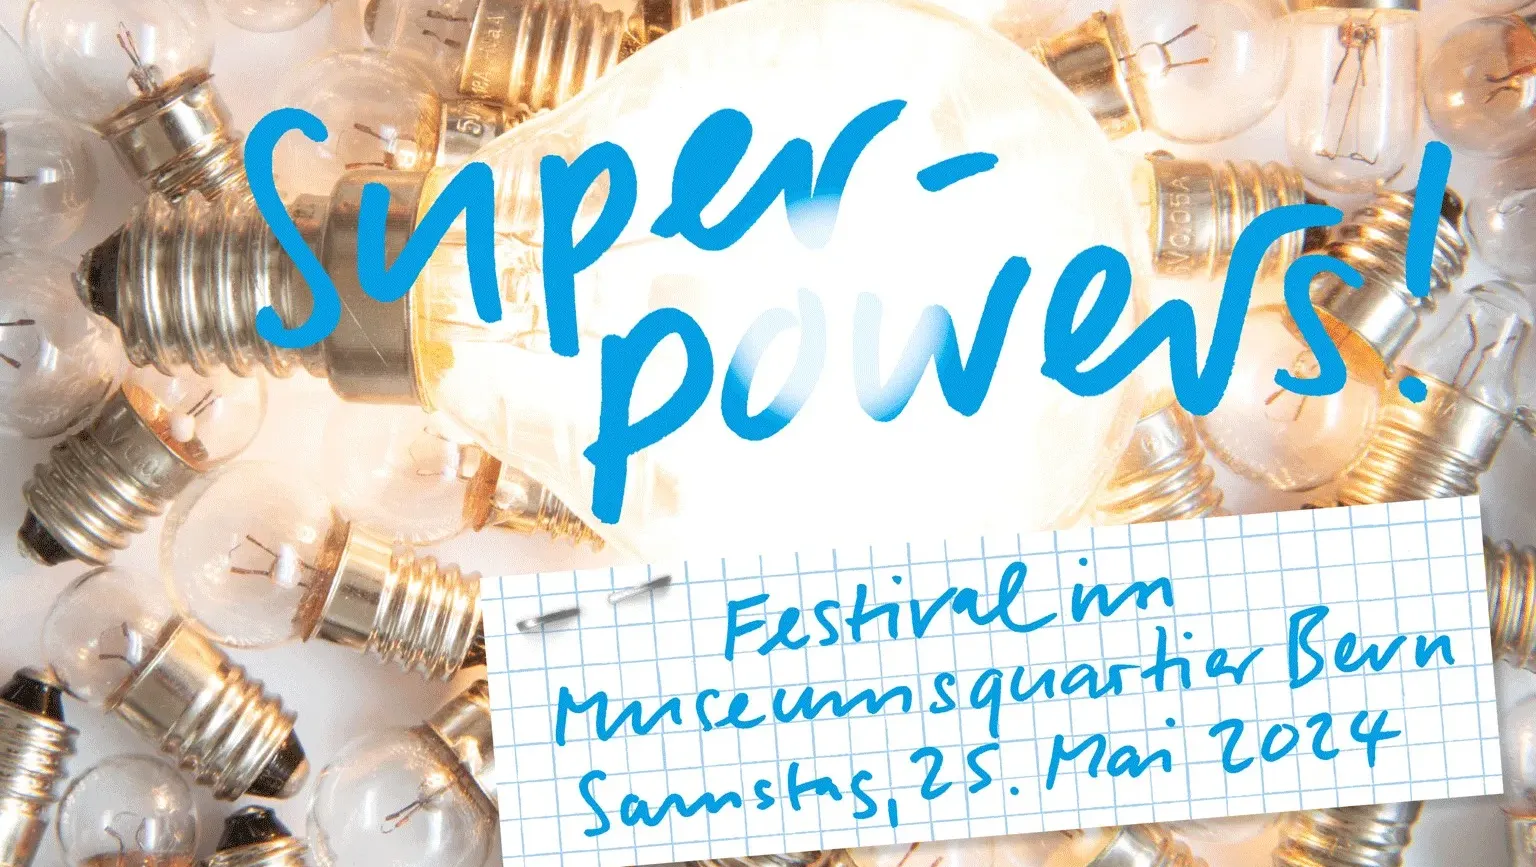 SUPERPOWERS! Festival